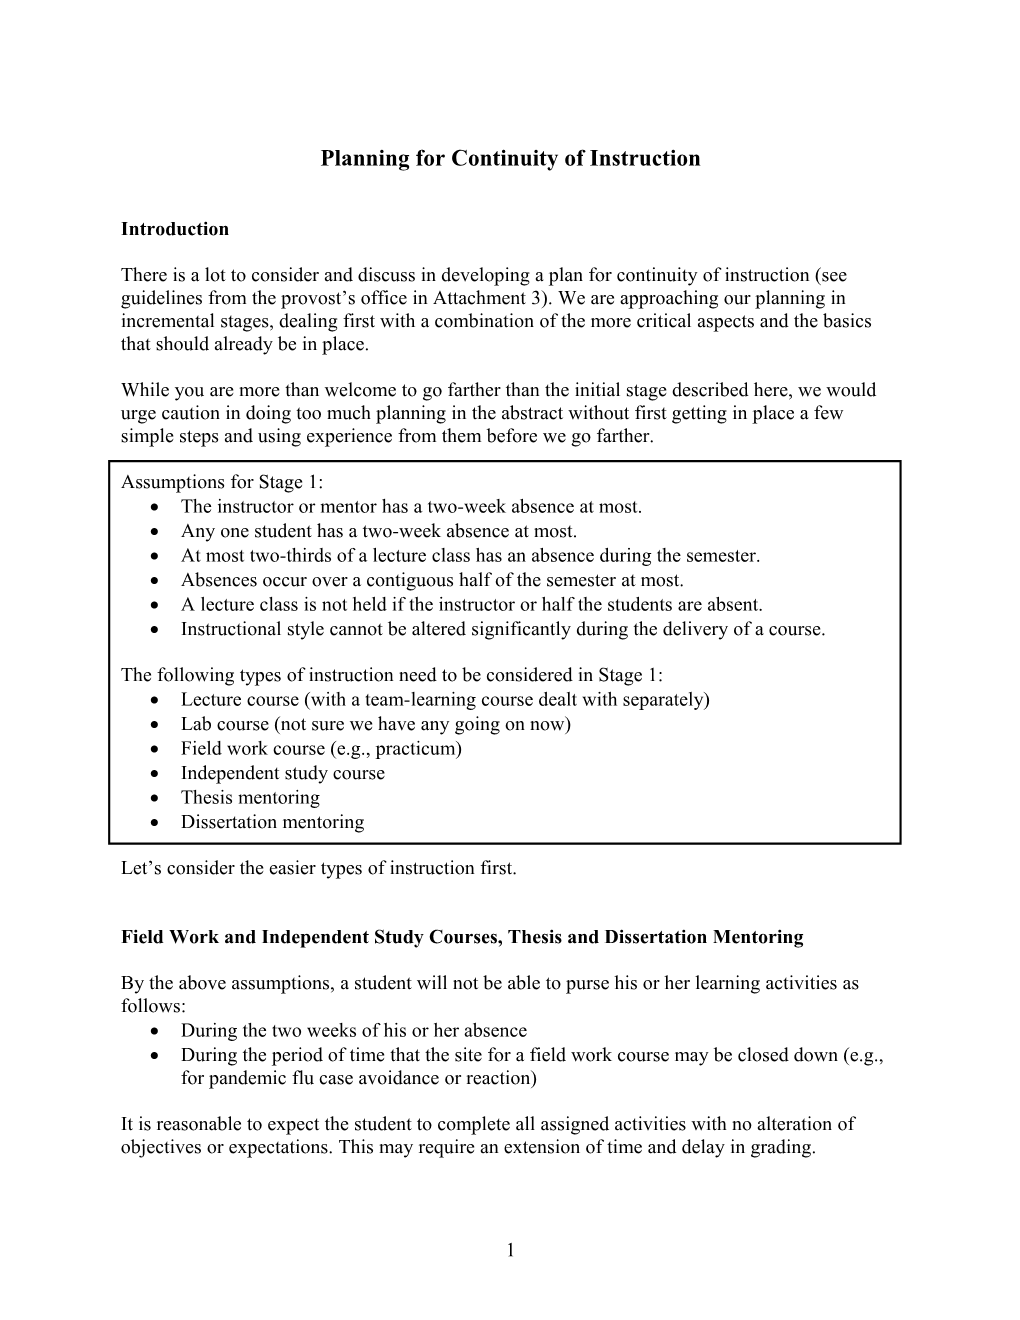 Planning for Continuity of Instruction